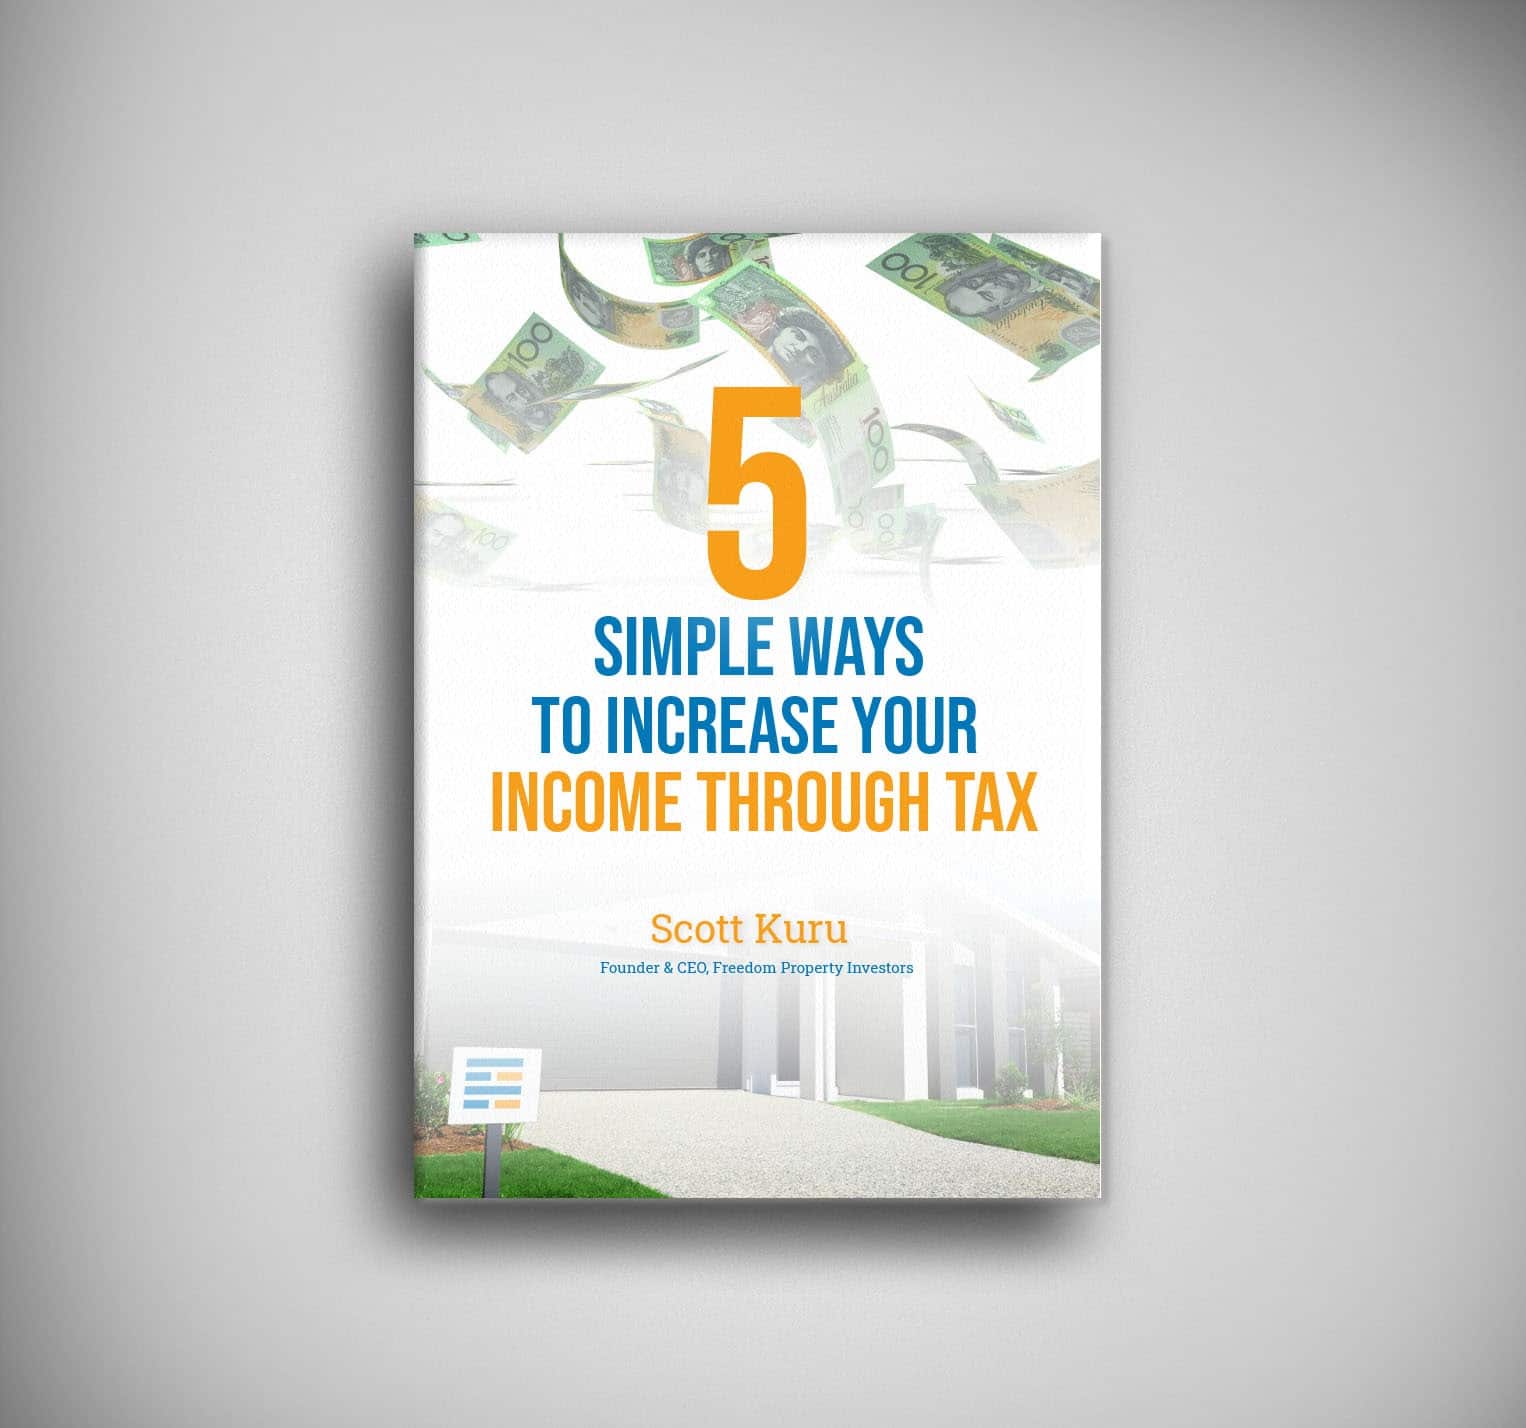 5 Simple Ways to Increase Your Income Through Tax